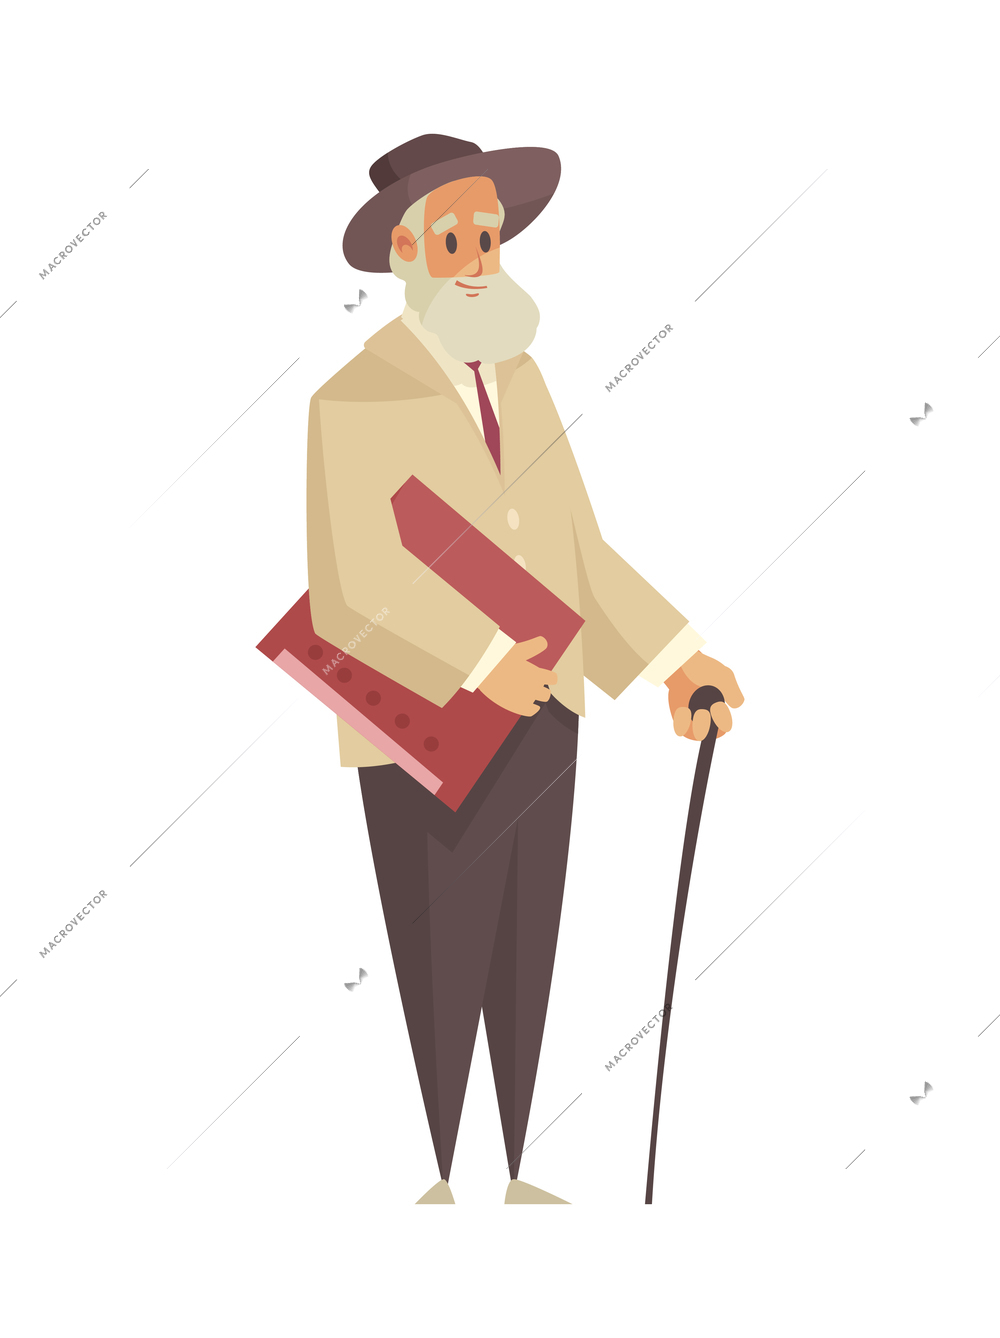 Garage sale items composition with character of elderly man holding folder and stick vector illustration